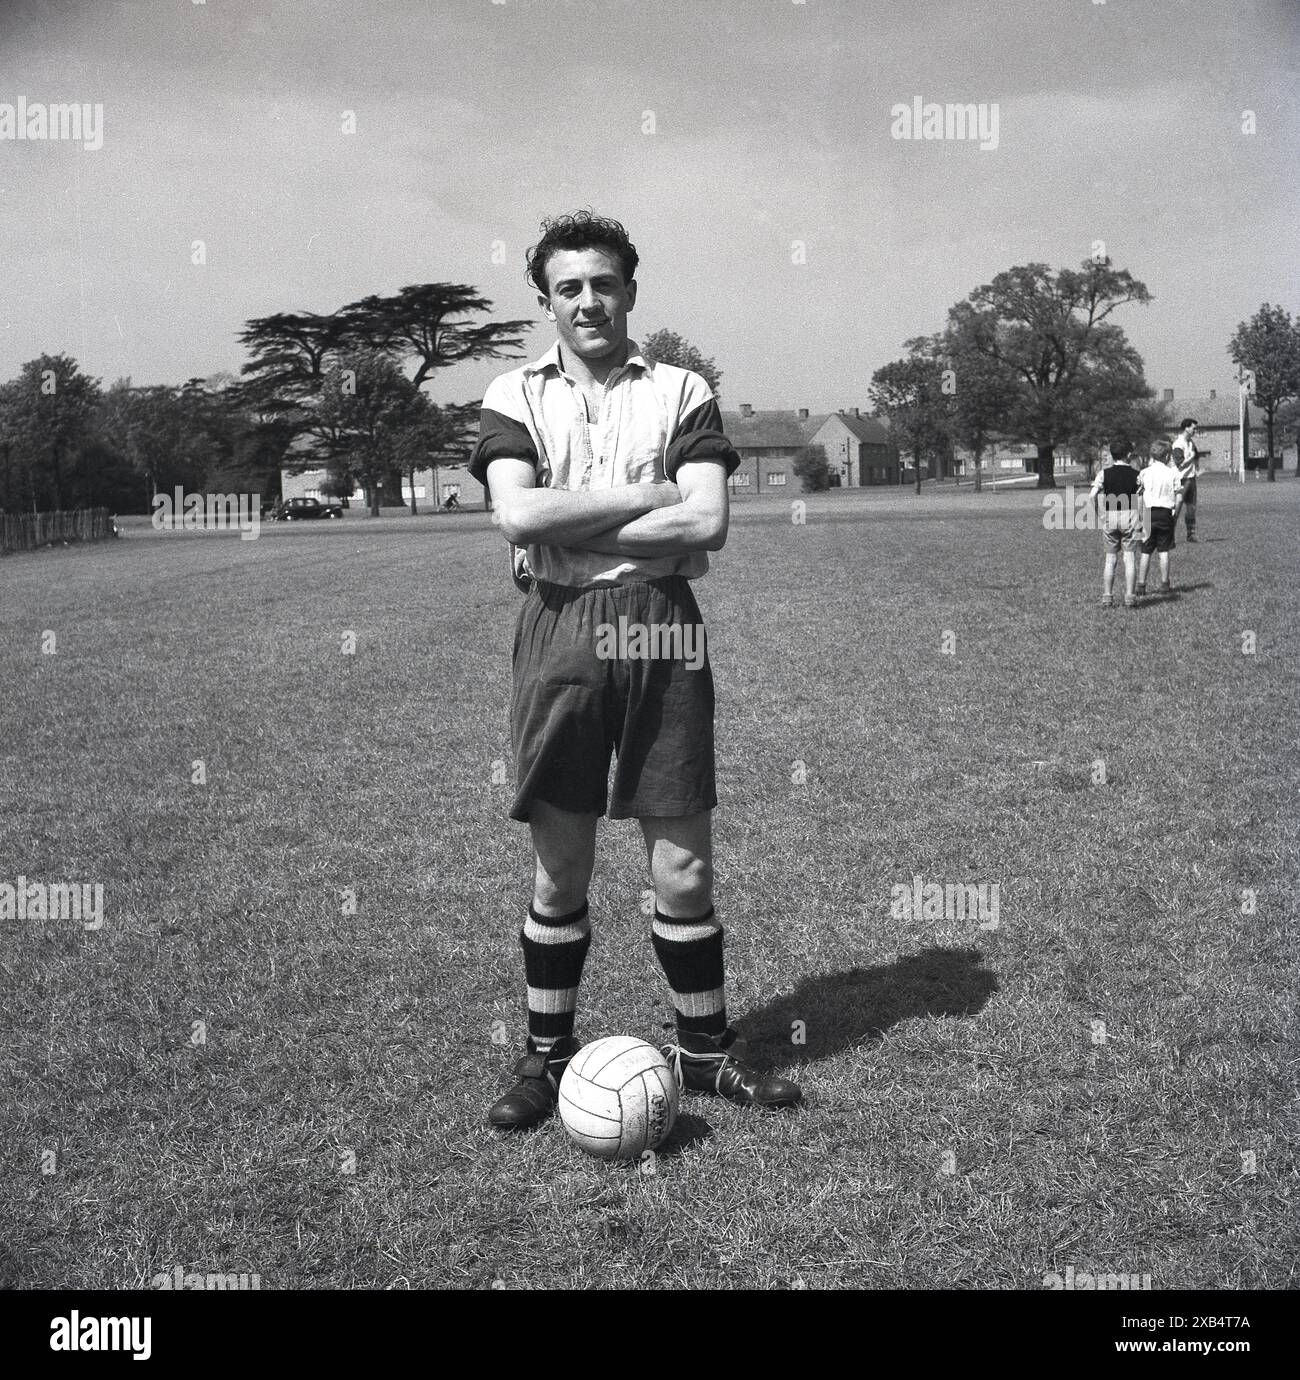 1953, historical, pre-season, training ground, Enfield Highway F. C, London, England, UK, footballer poses for picture in kit of the era, long shorts and leather boots with high ankle. Stock Photo